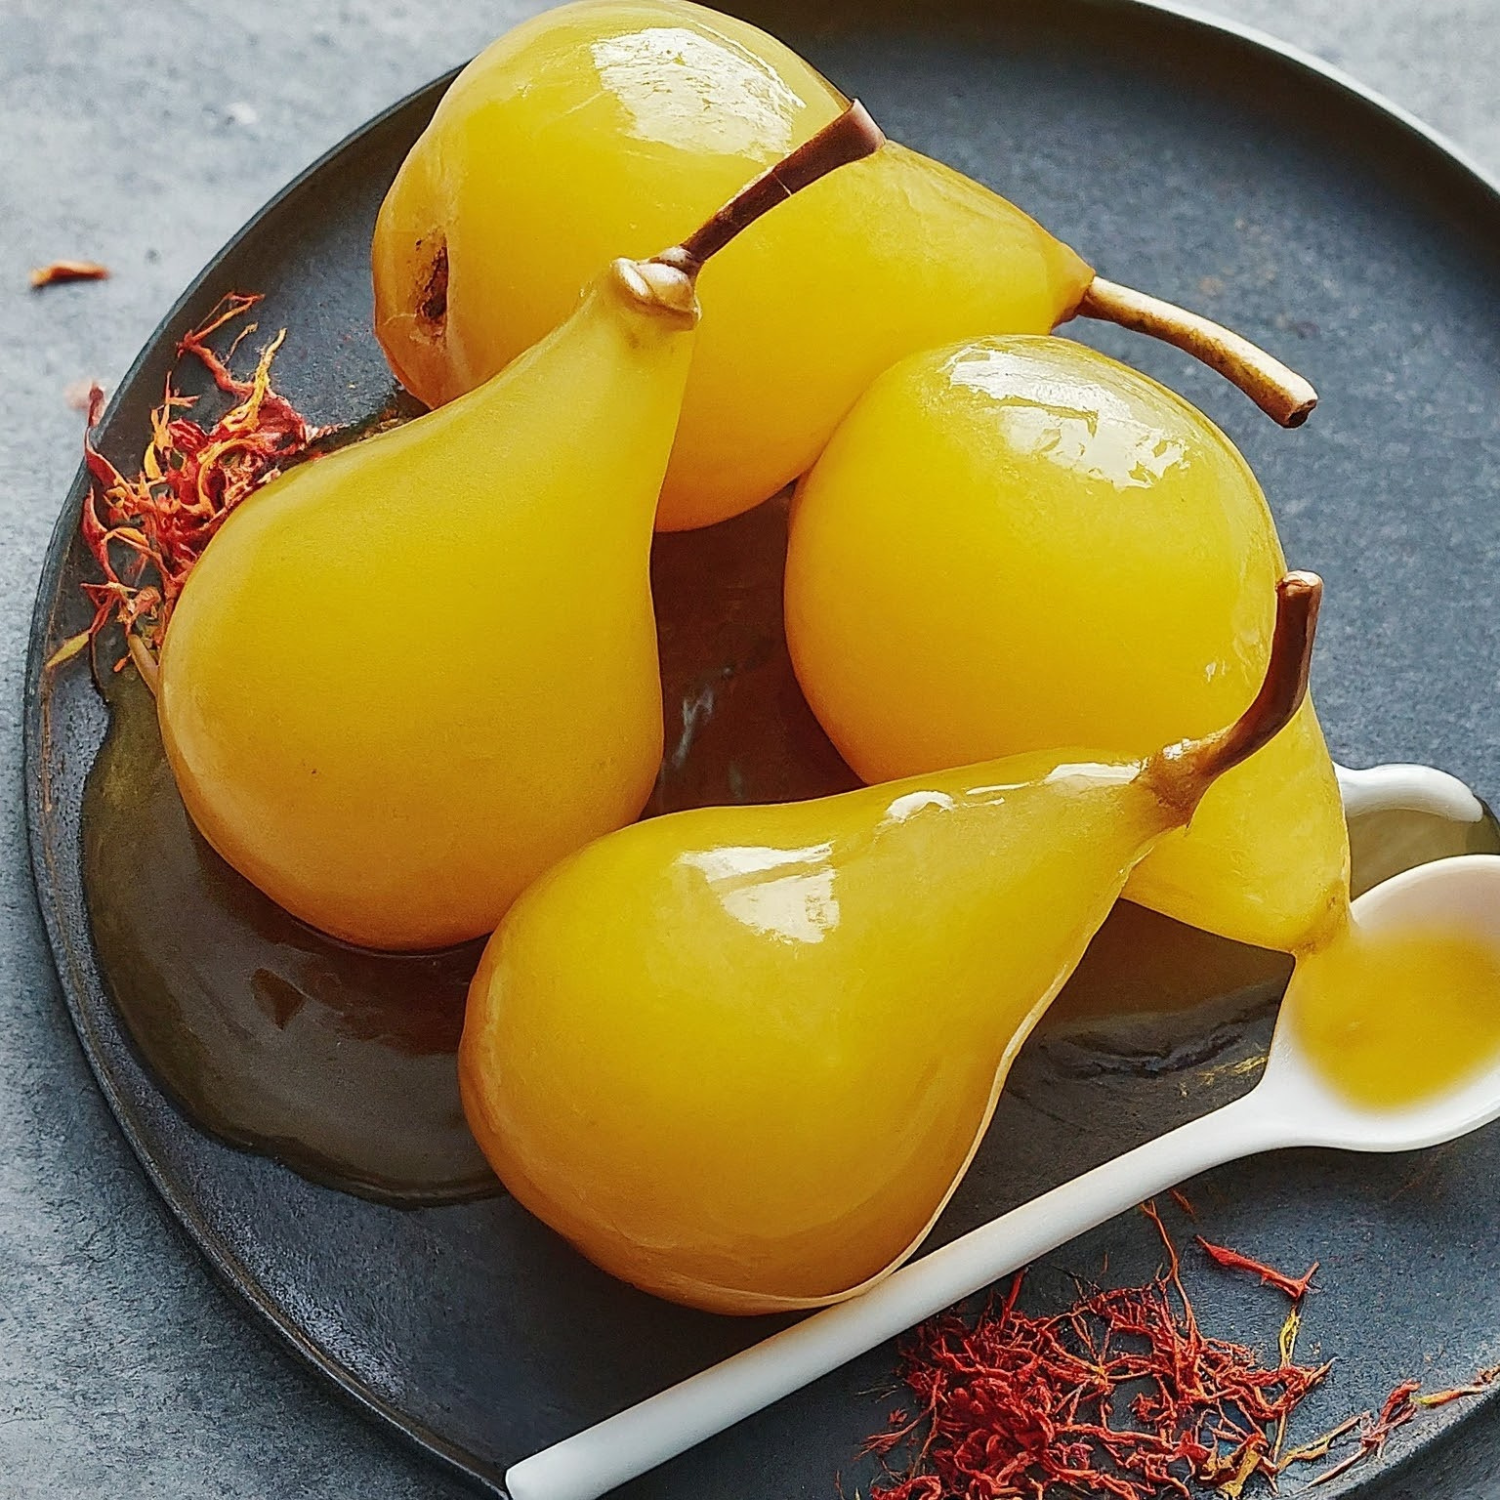 RECIPE FOR PEARS WITH SAFFRON - MAISON BOTEH